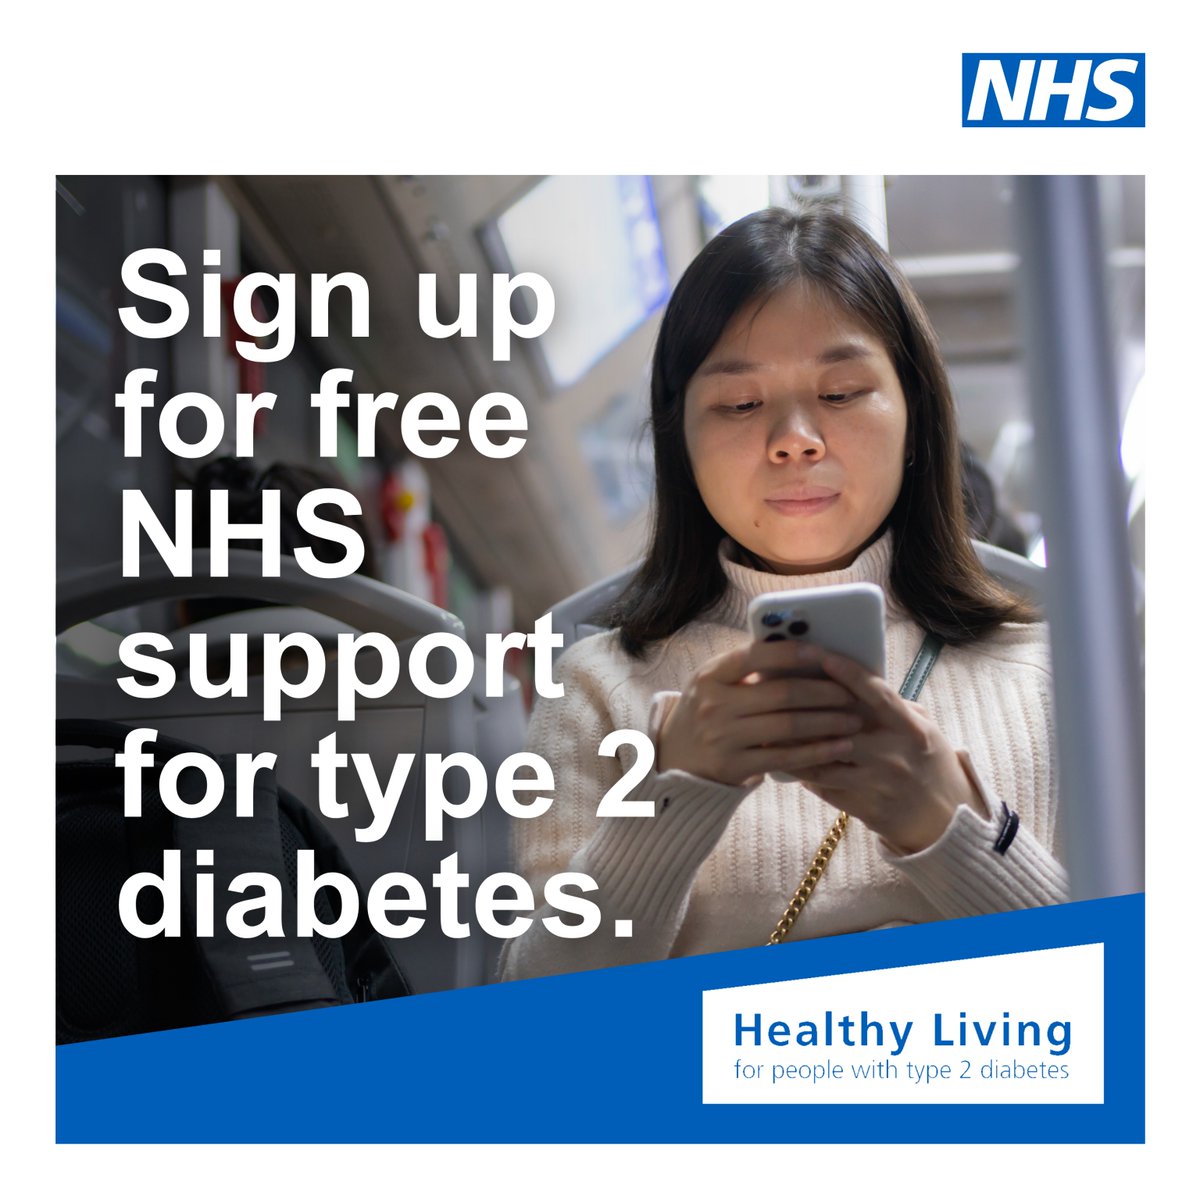 The free NHS Healthy Living programme helps people feel confident in managing type 2 diabetes wherever they are. Find out more at healthyliving.nhs.uk.